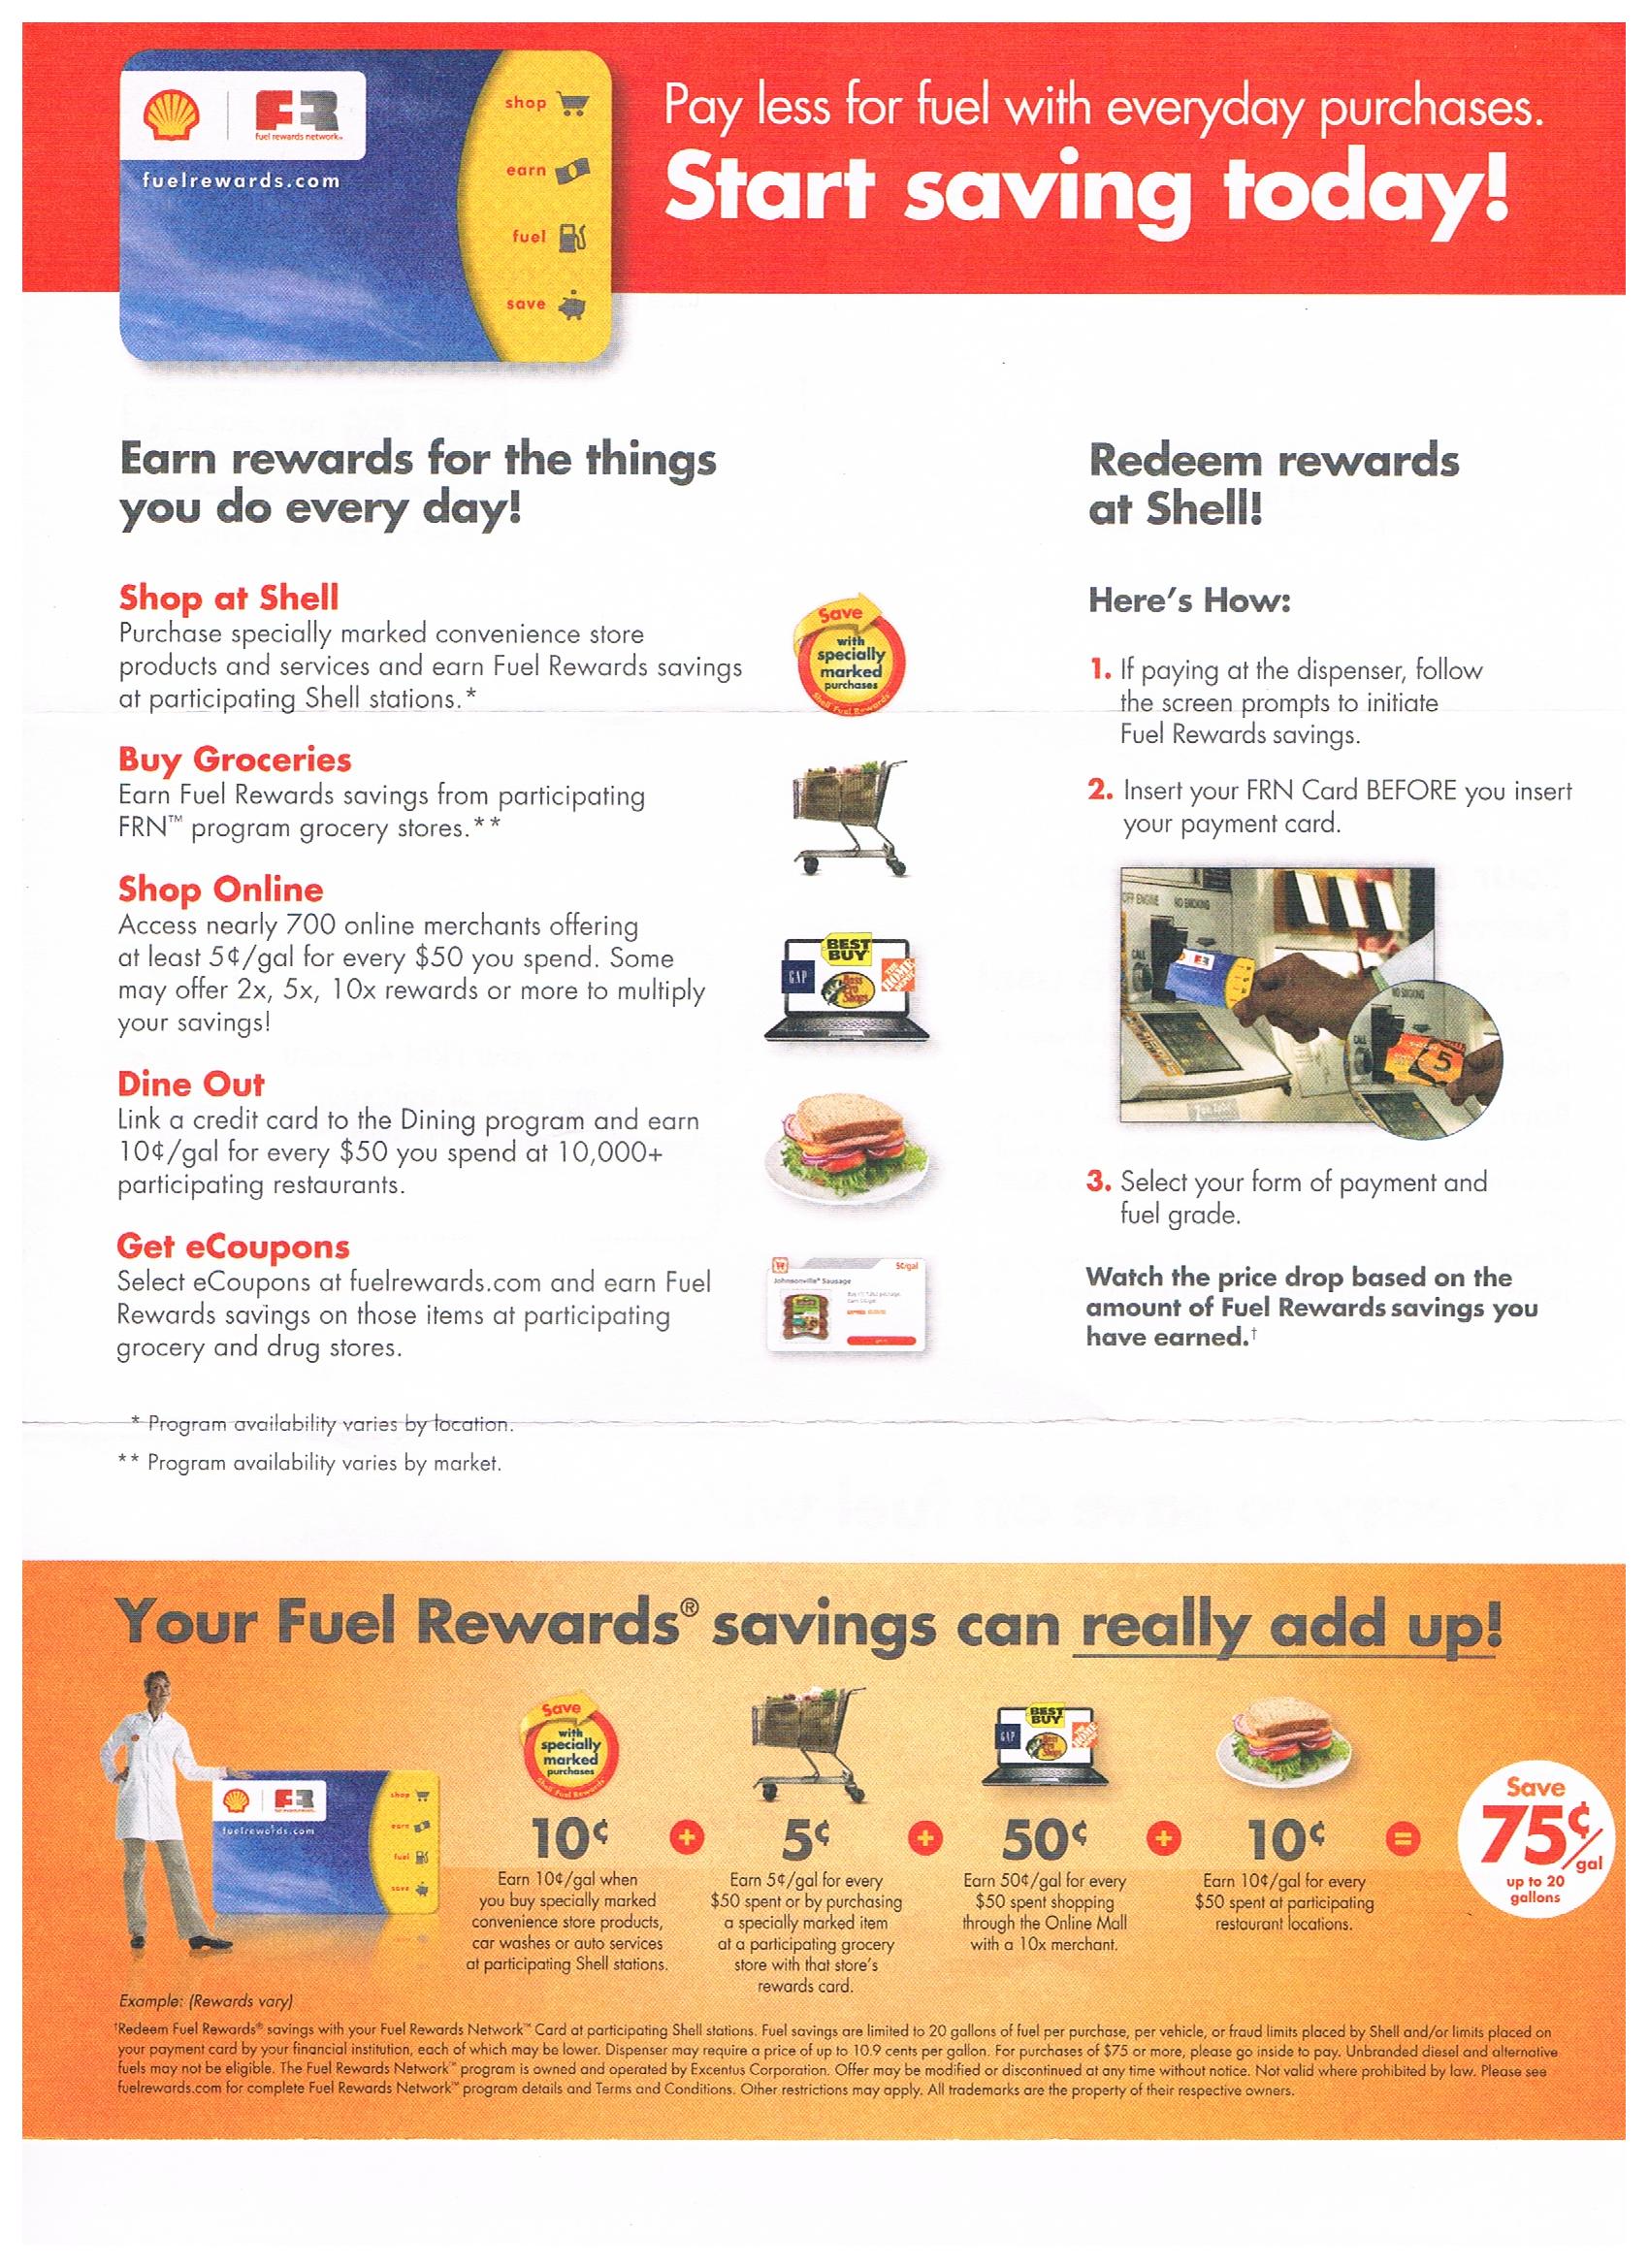 ultimate-strategy-of-fuel-rewards-network-1-2-ways-to-save-money-when